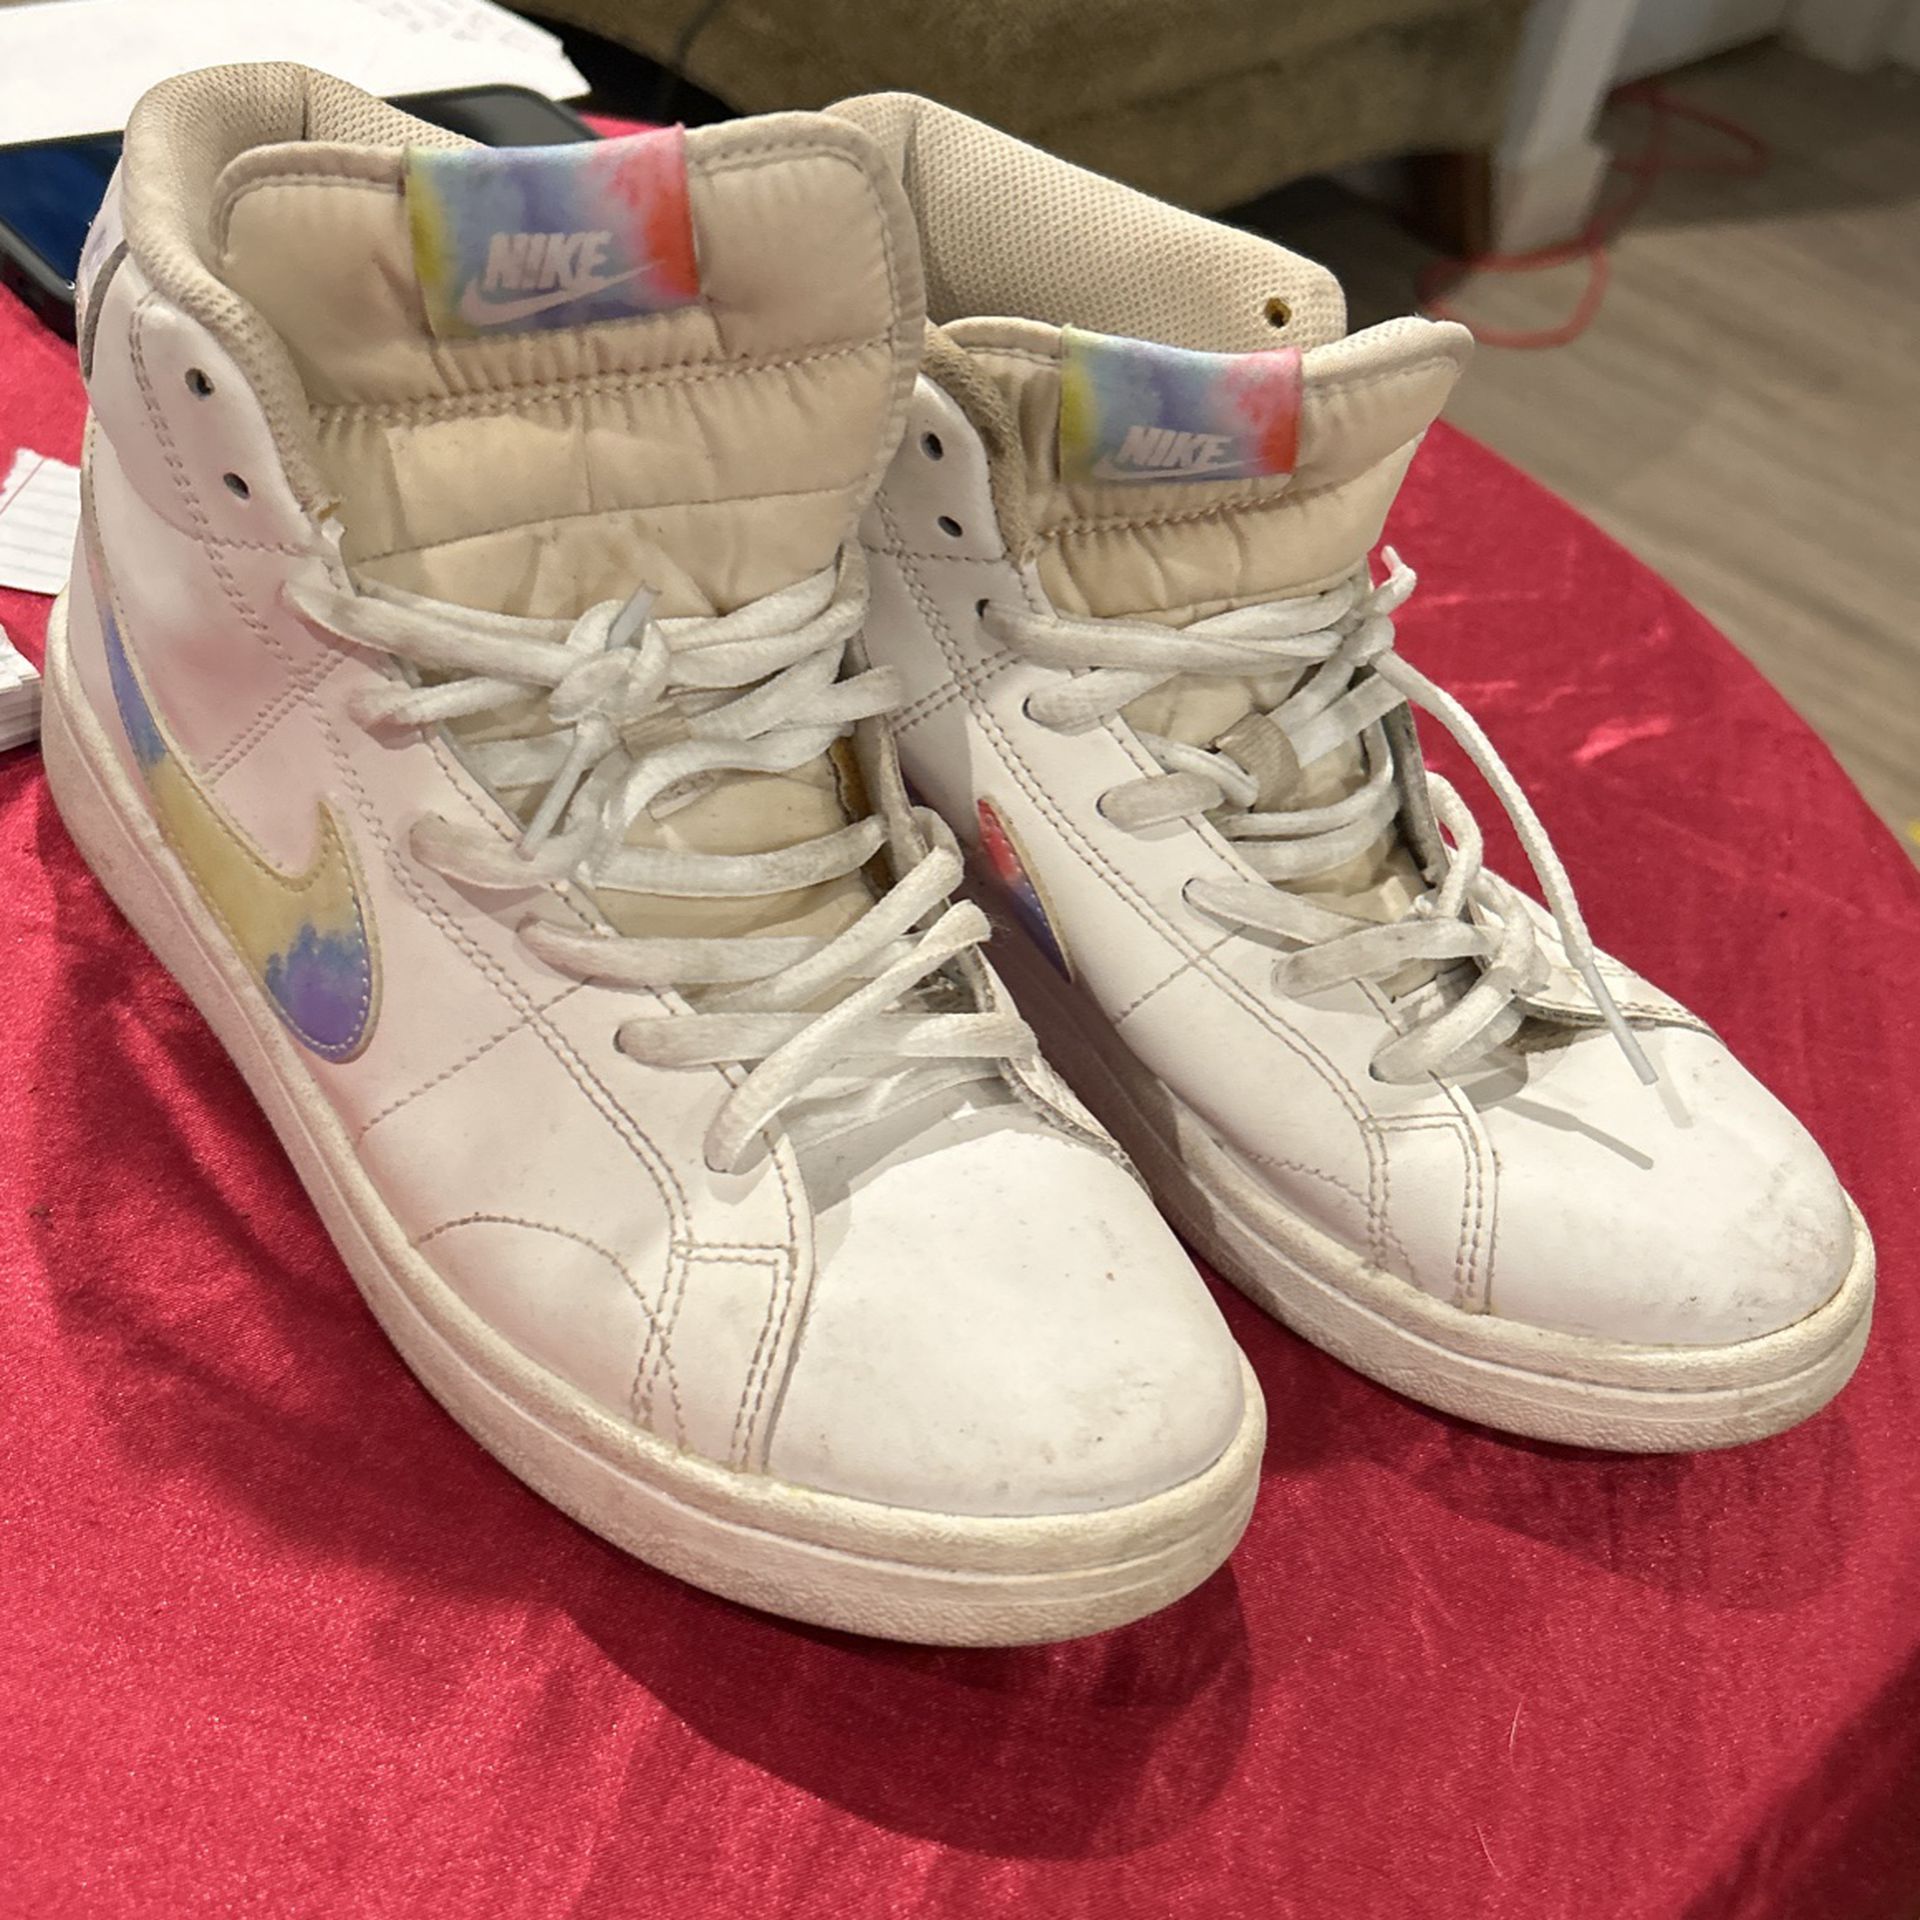  Women's Court Royale 2 Mid High-Top Casual Sneakers from Finish Line 7.5